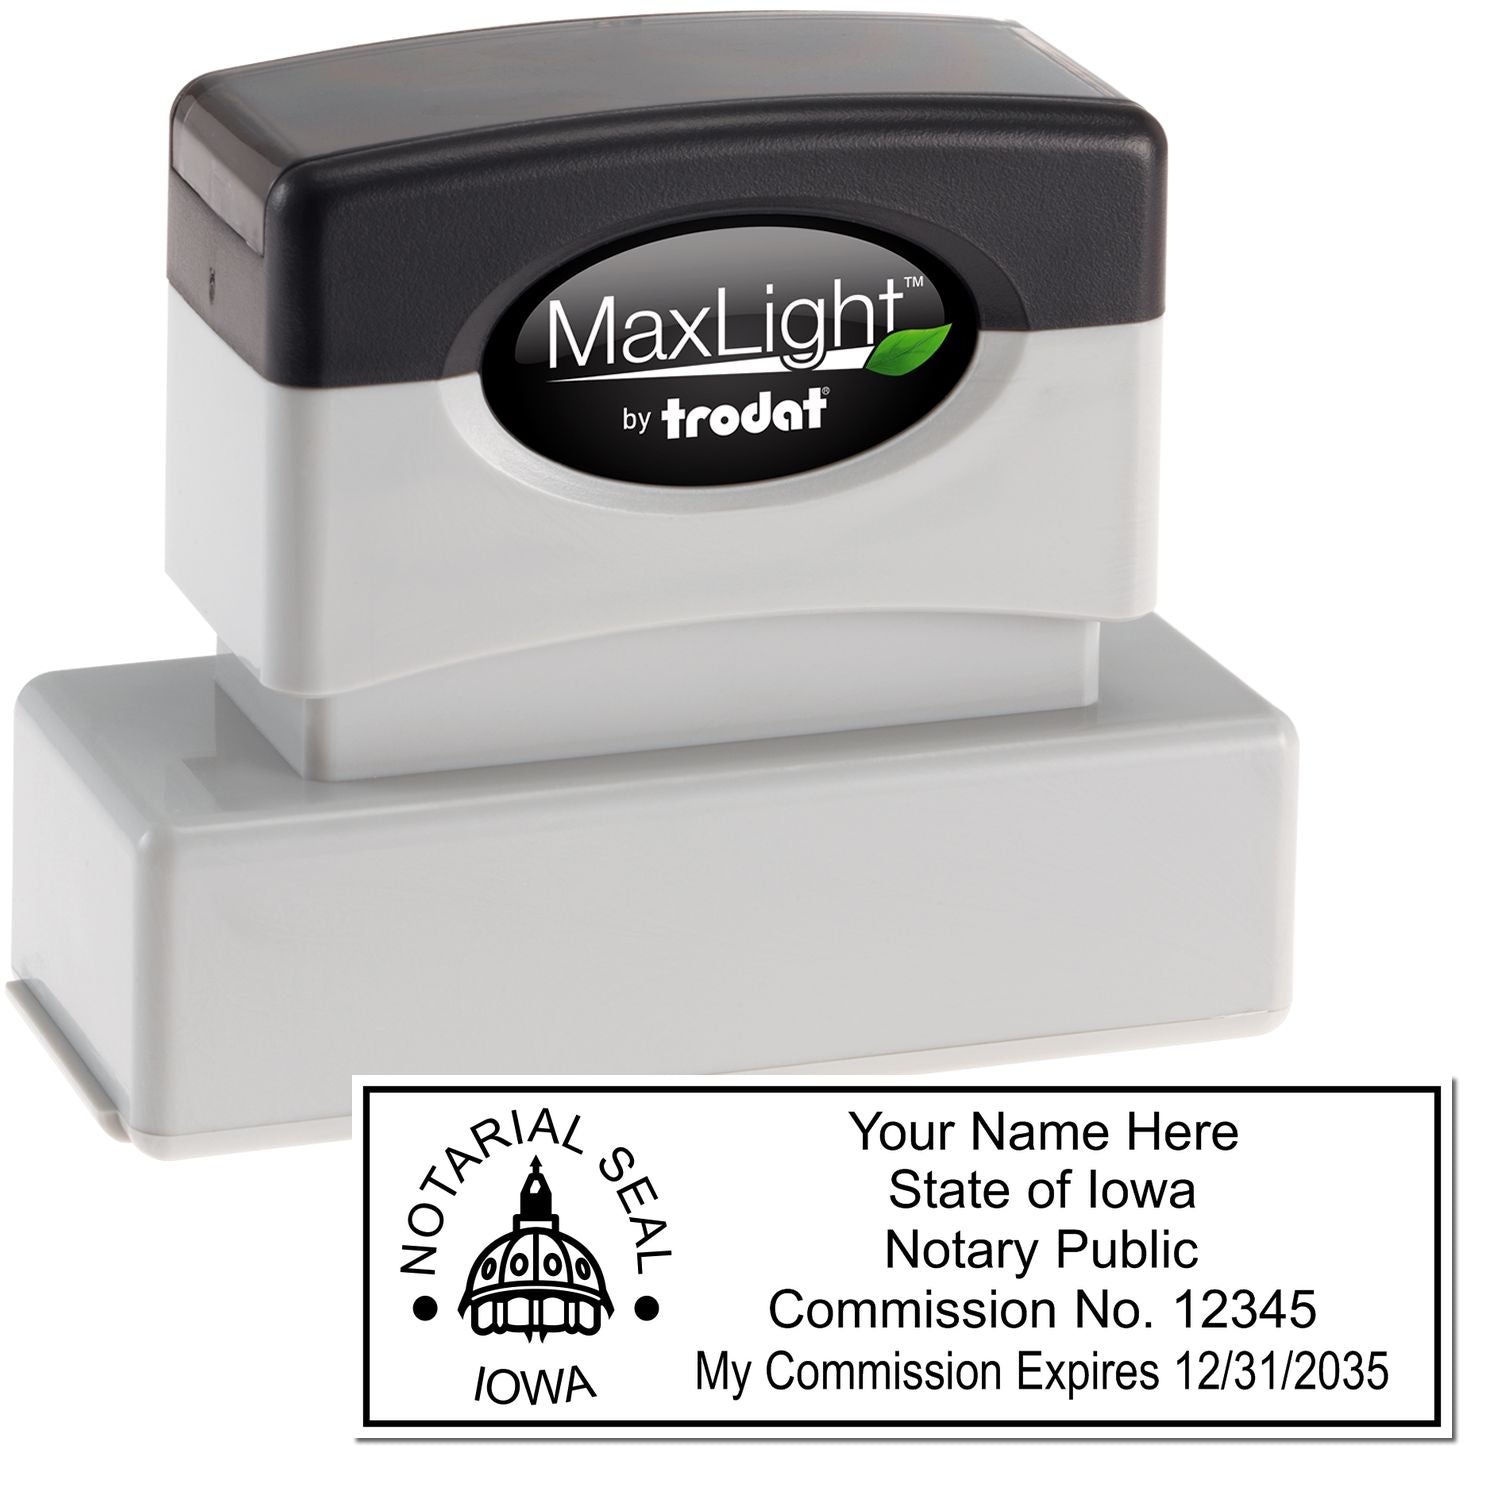 The main image for the MaxLight Premium Pre-Inked Iowa State Seal Notarial Stamp depicting a sample of the imprint and electronic files